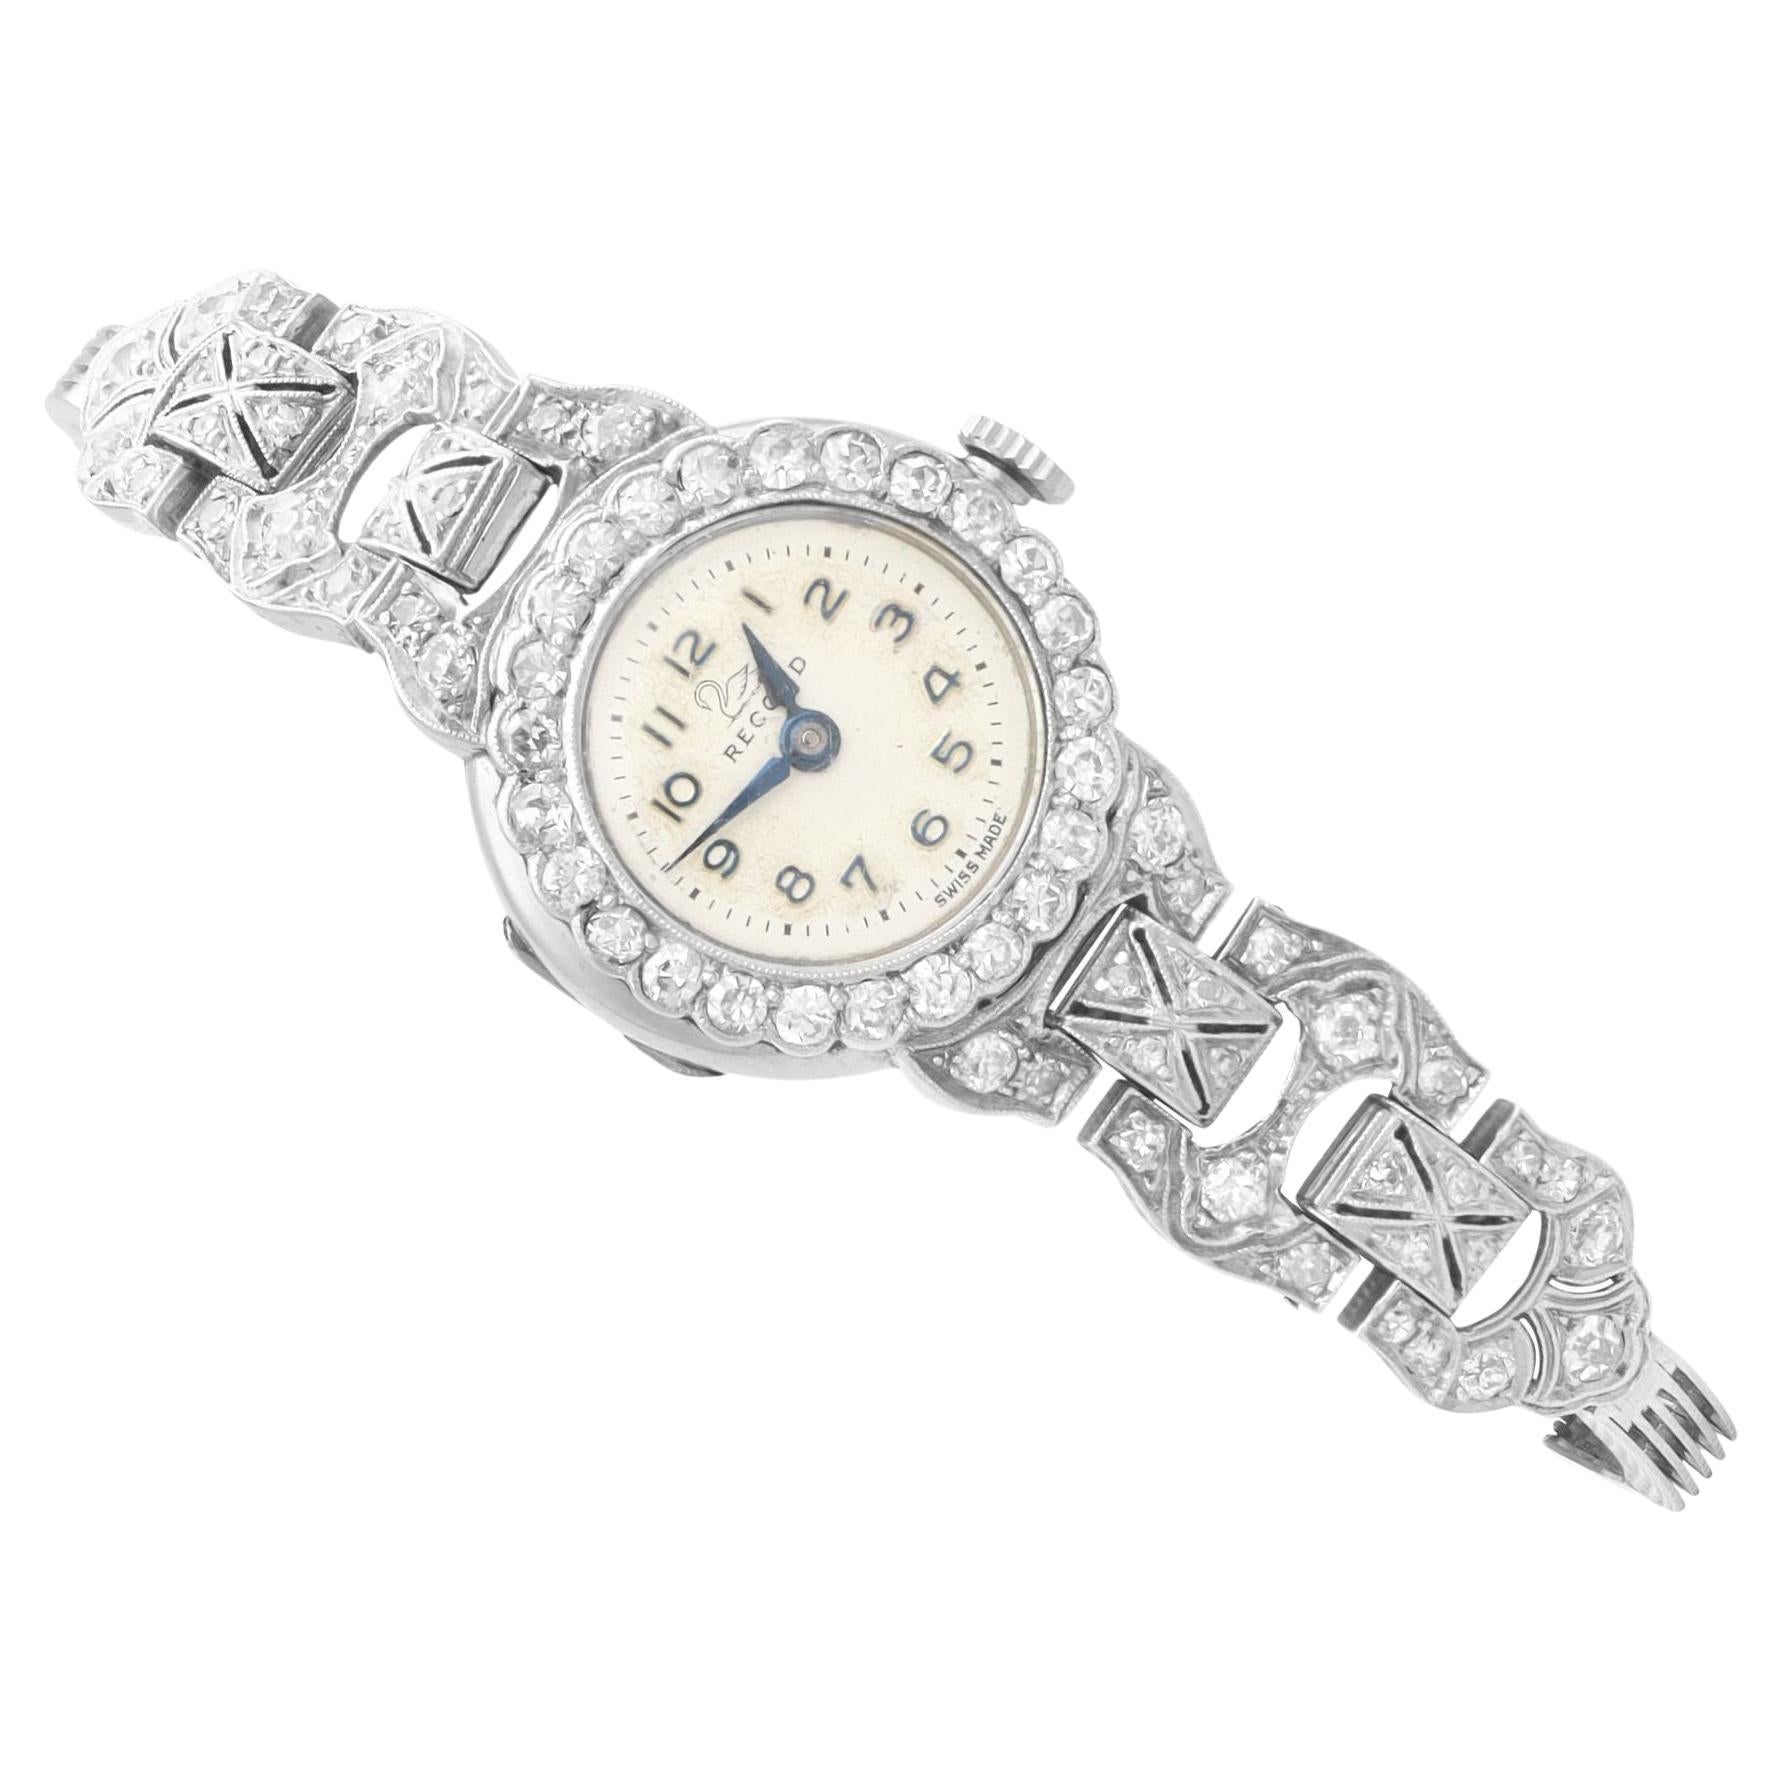 Antique 2.16 Carat Diamond and White Gold Cocktail Watch, circa 1925 For Sale